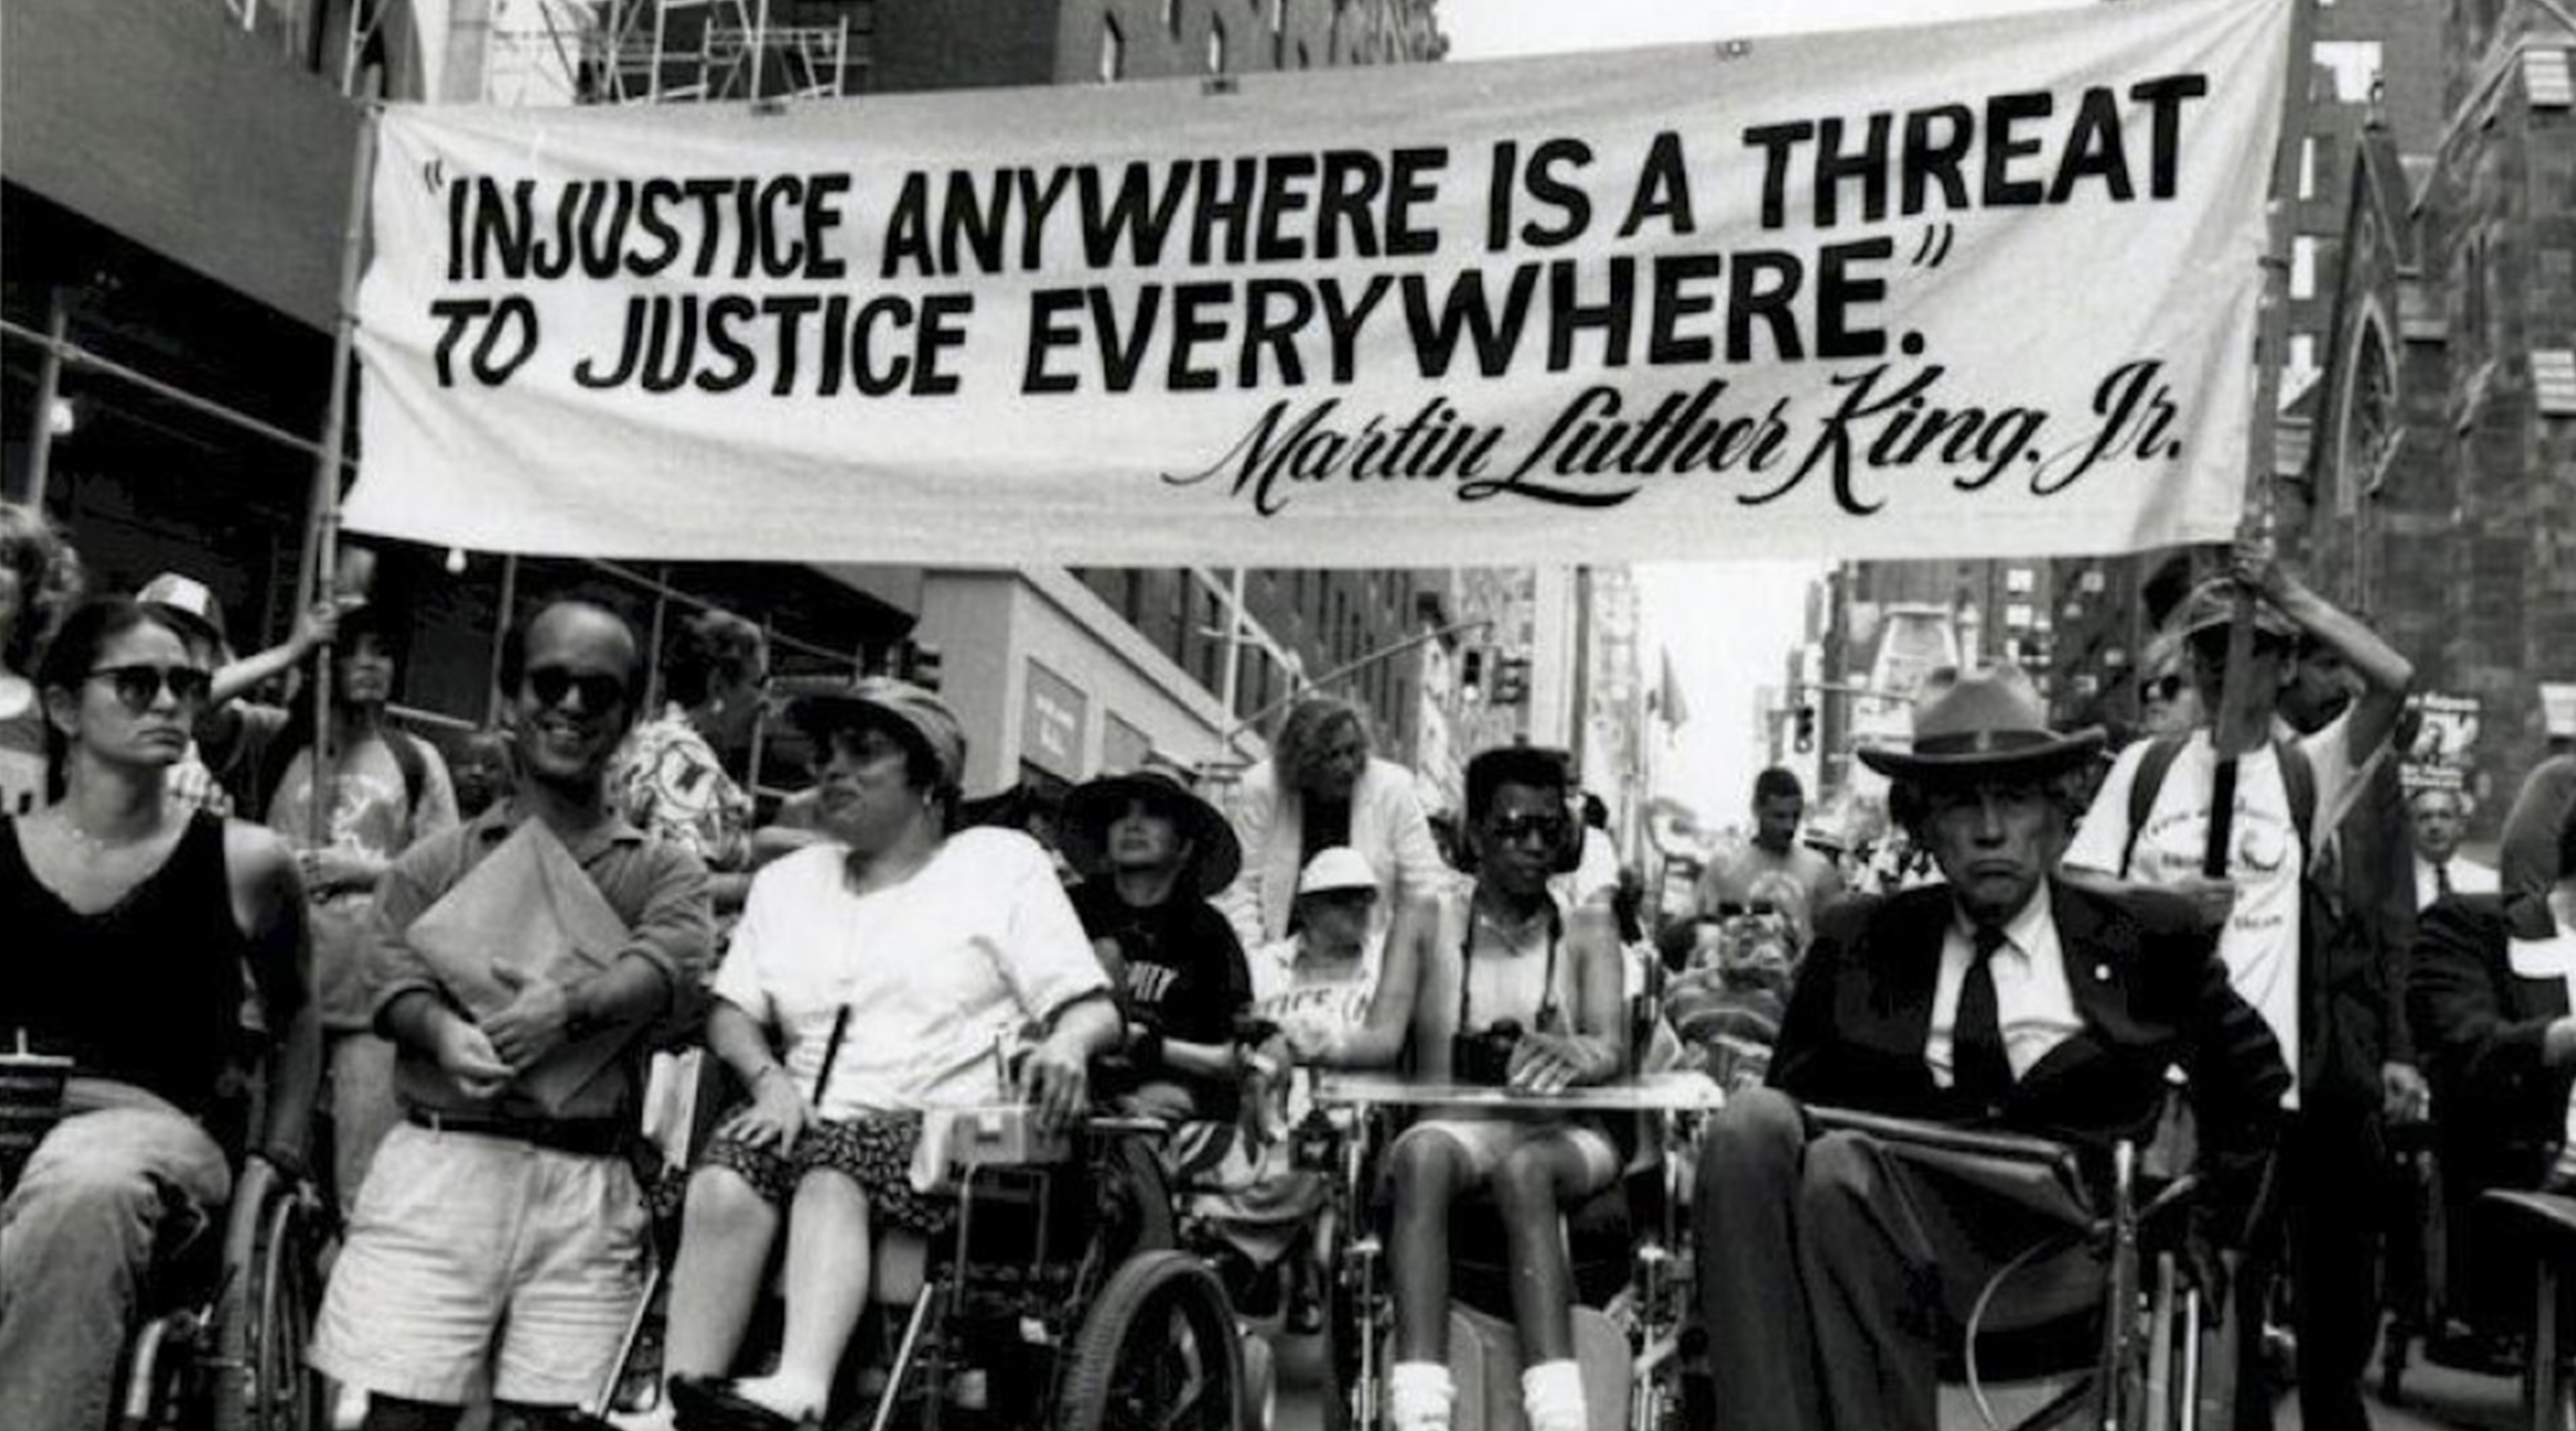 A crowd of people with disabilities and individuals in wheelchairs gather under a banner that reads "Injustice Anywhere is a Threat to Justice Everywhere" Martin Luther King Jr.